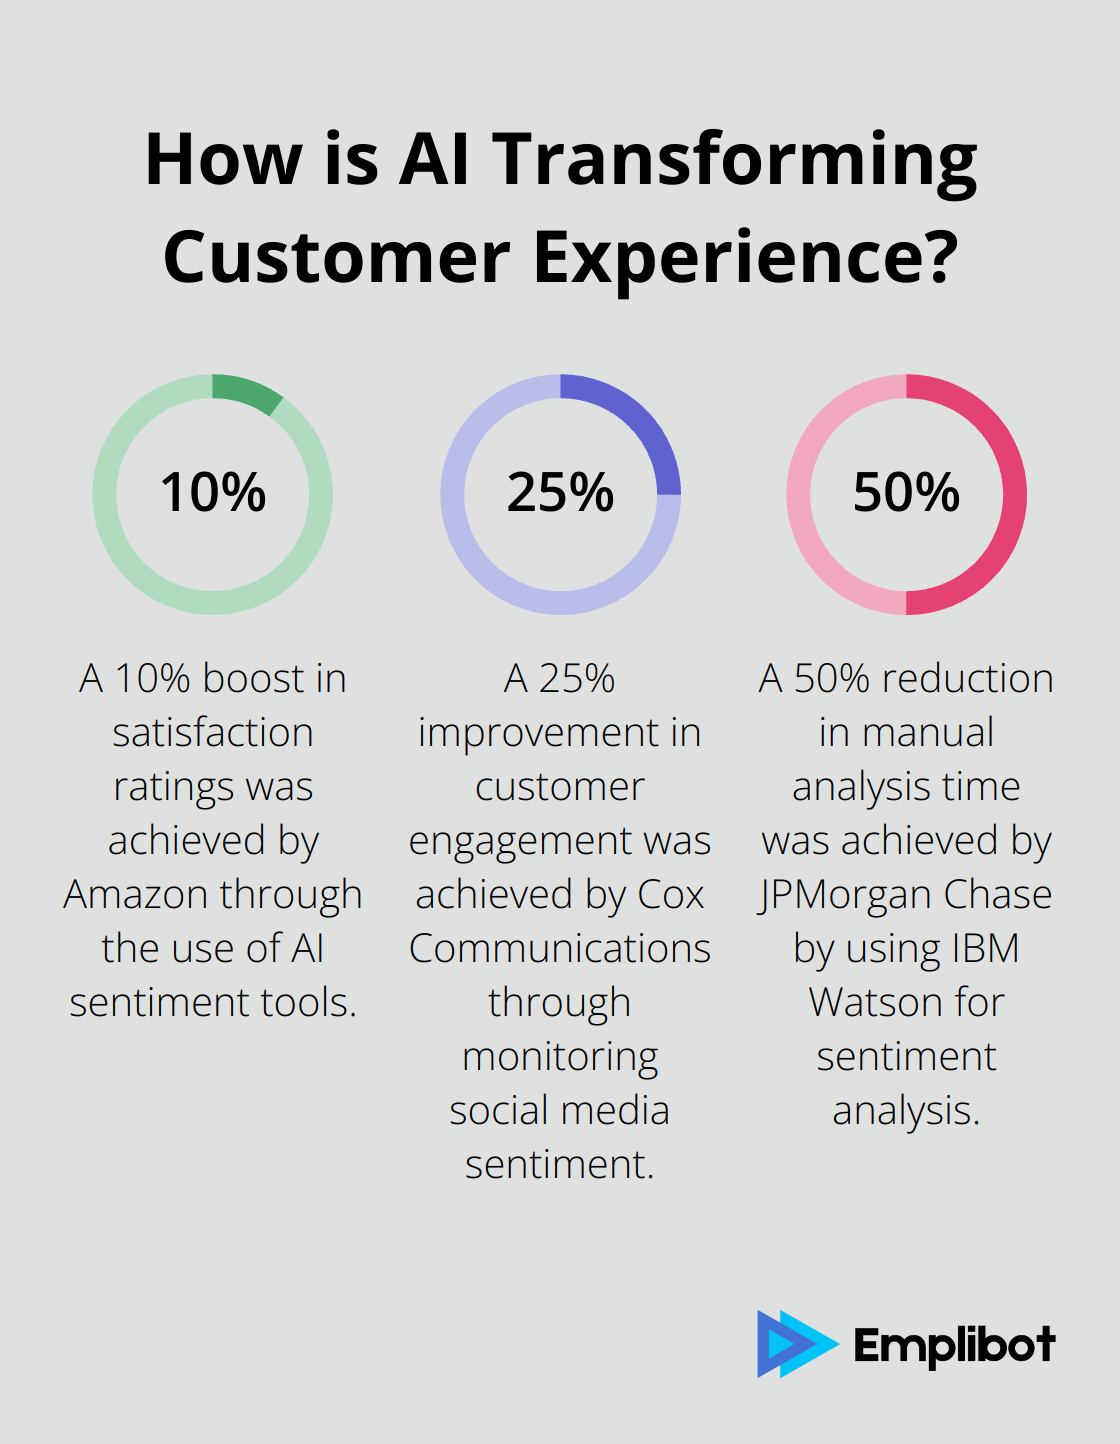 Fact - How is AI Transforming Customer Experience?